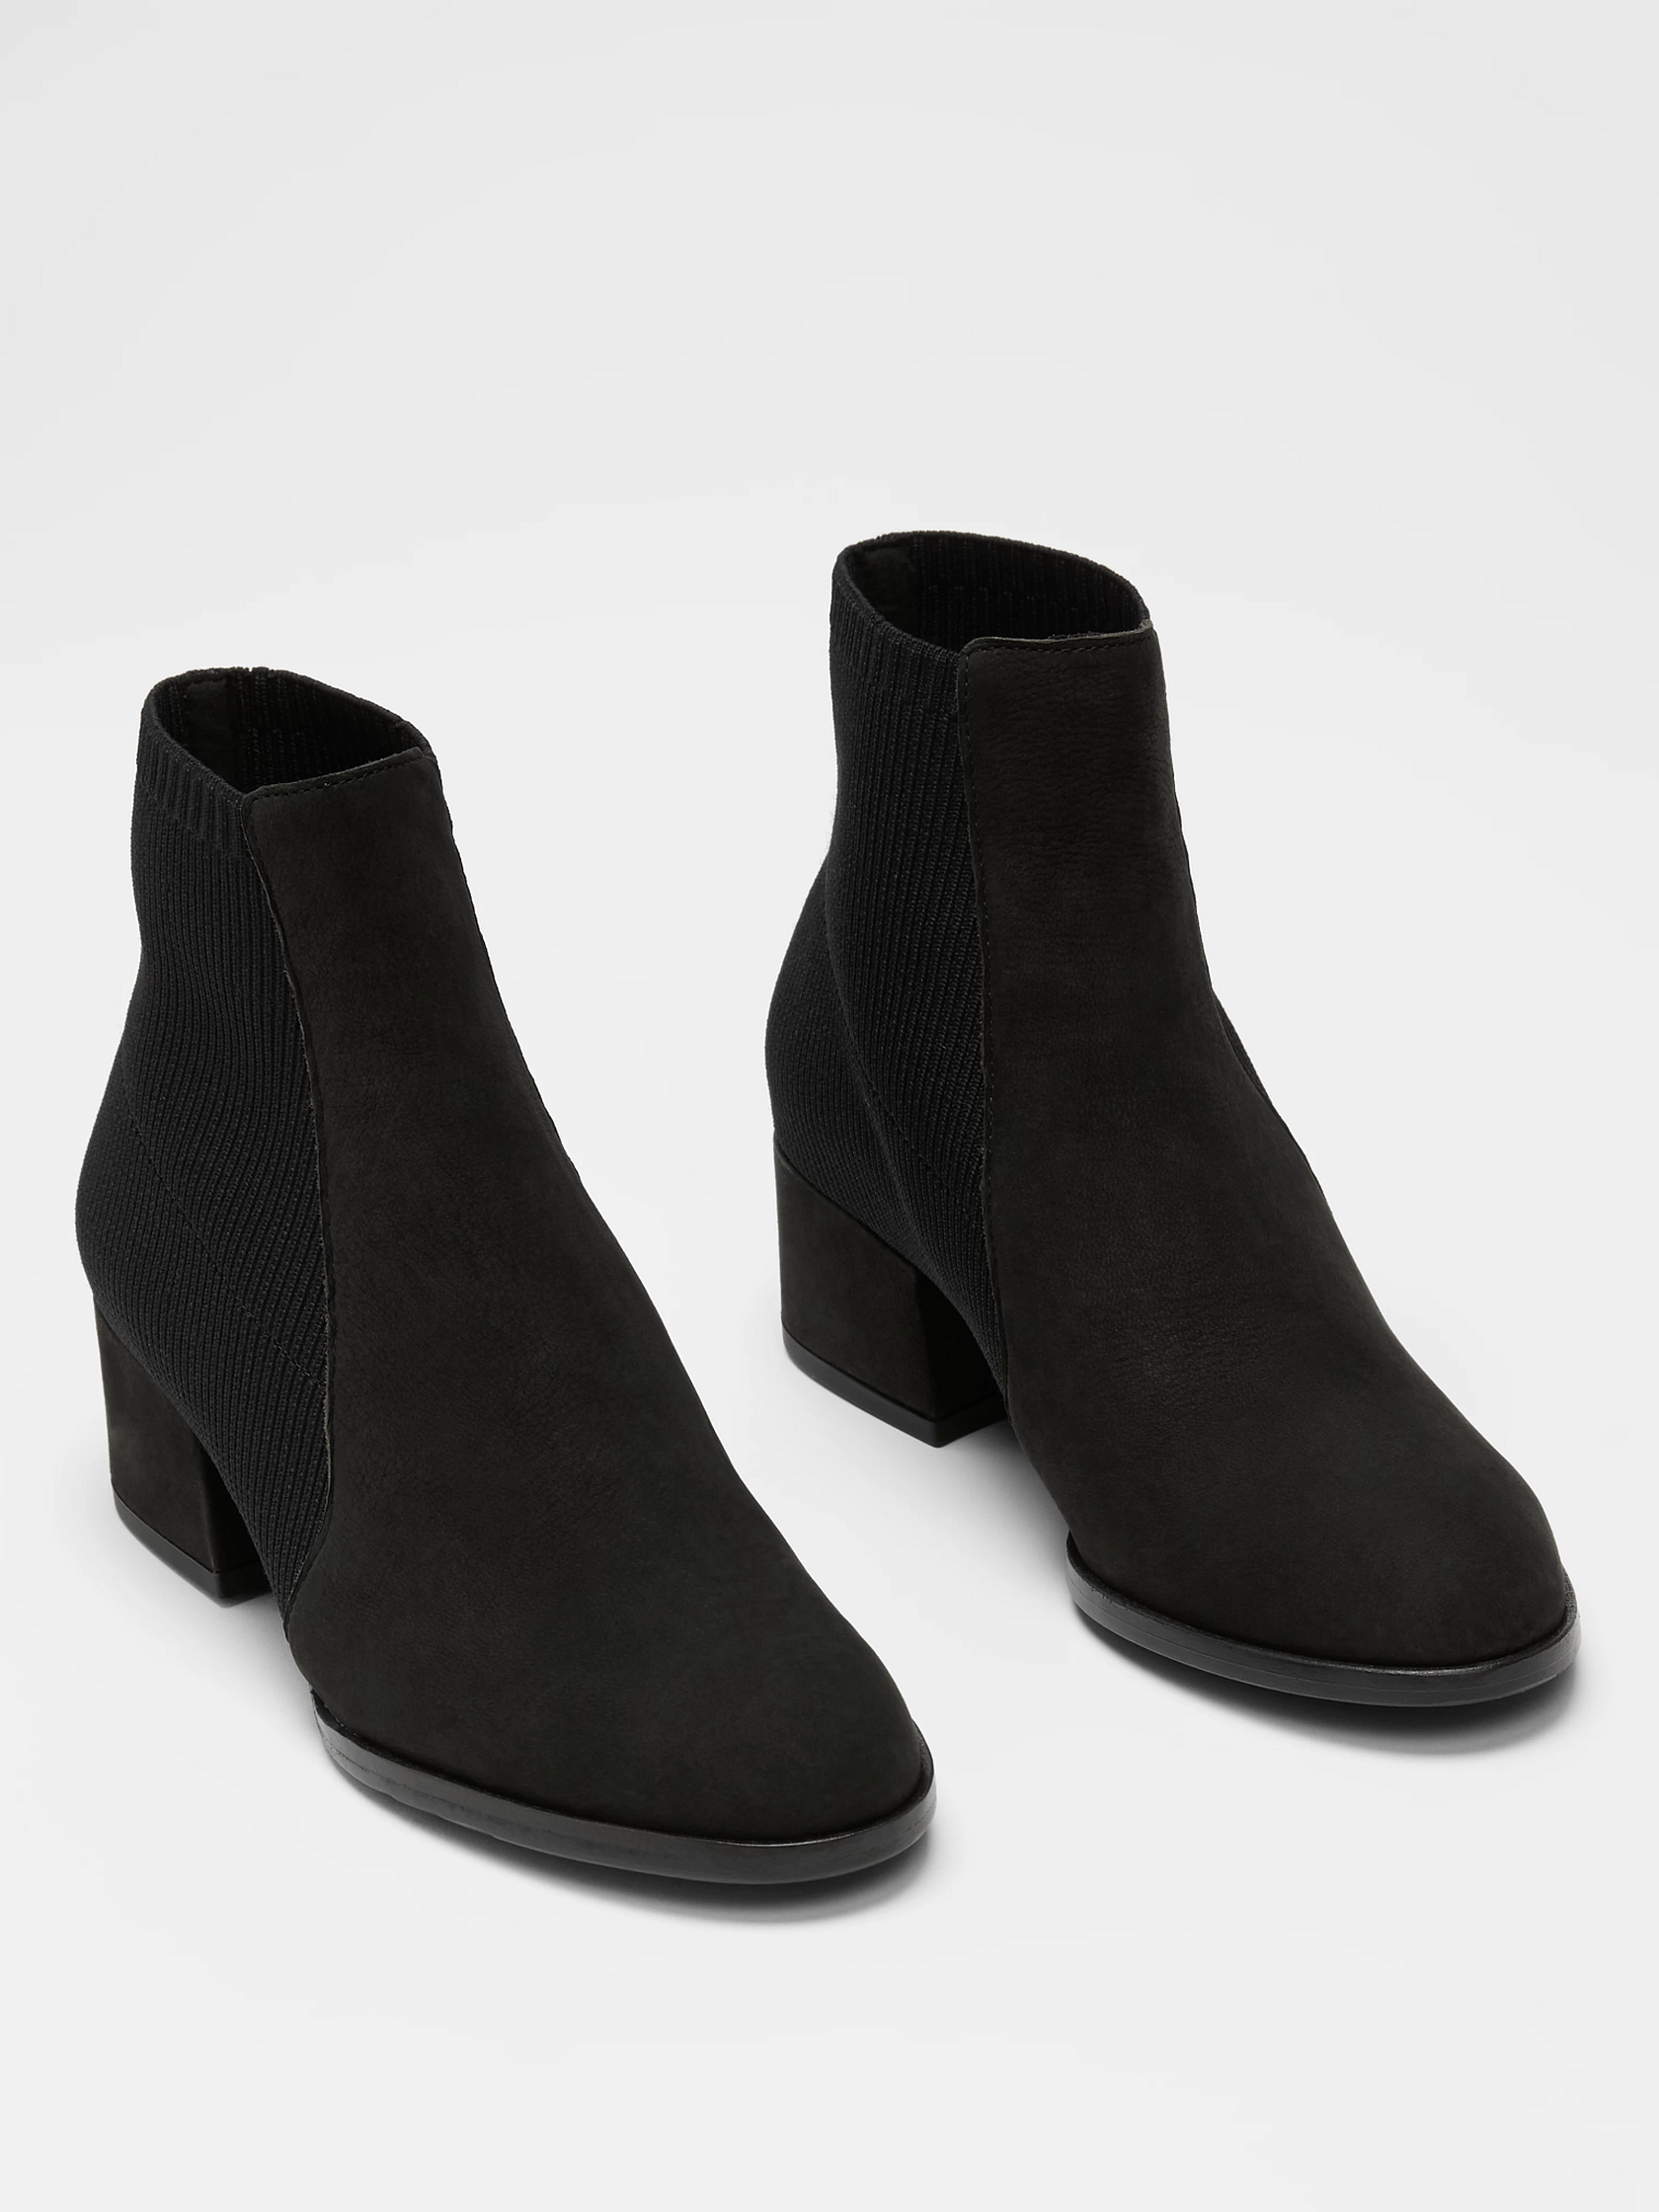 Aesop Tumbled Nubuck & Recycled Stretch Knit Bootie